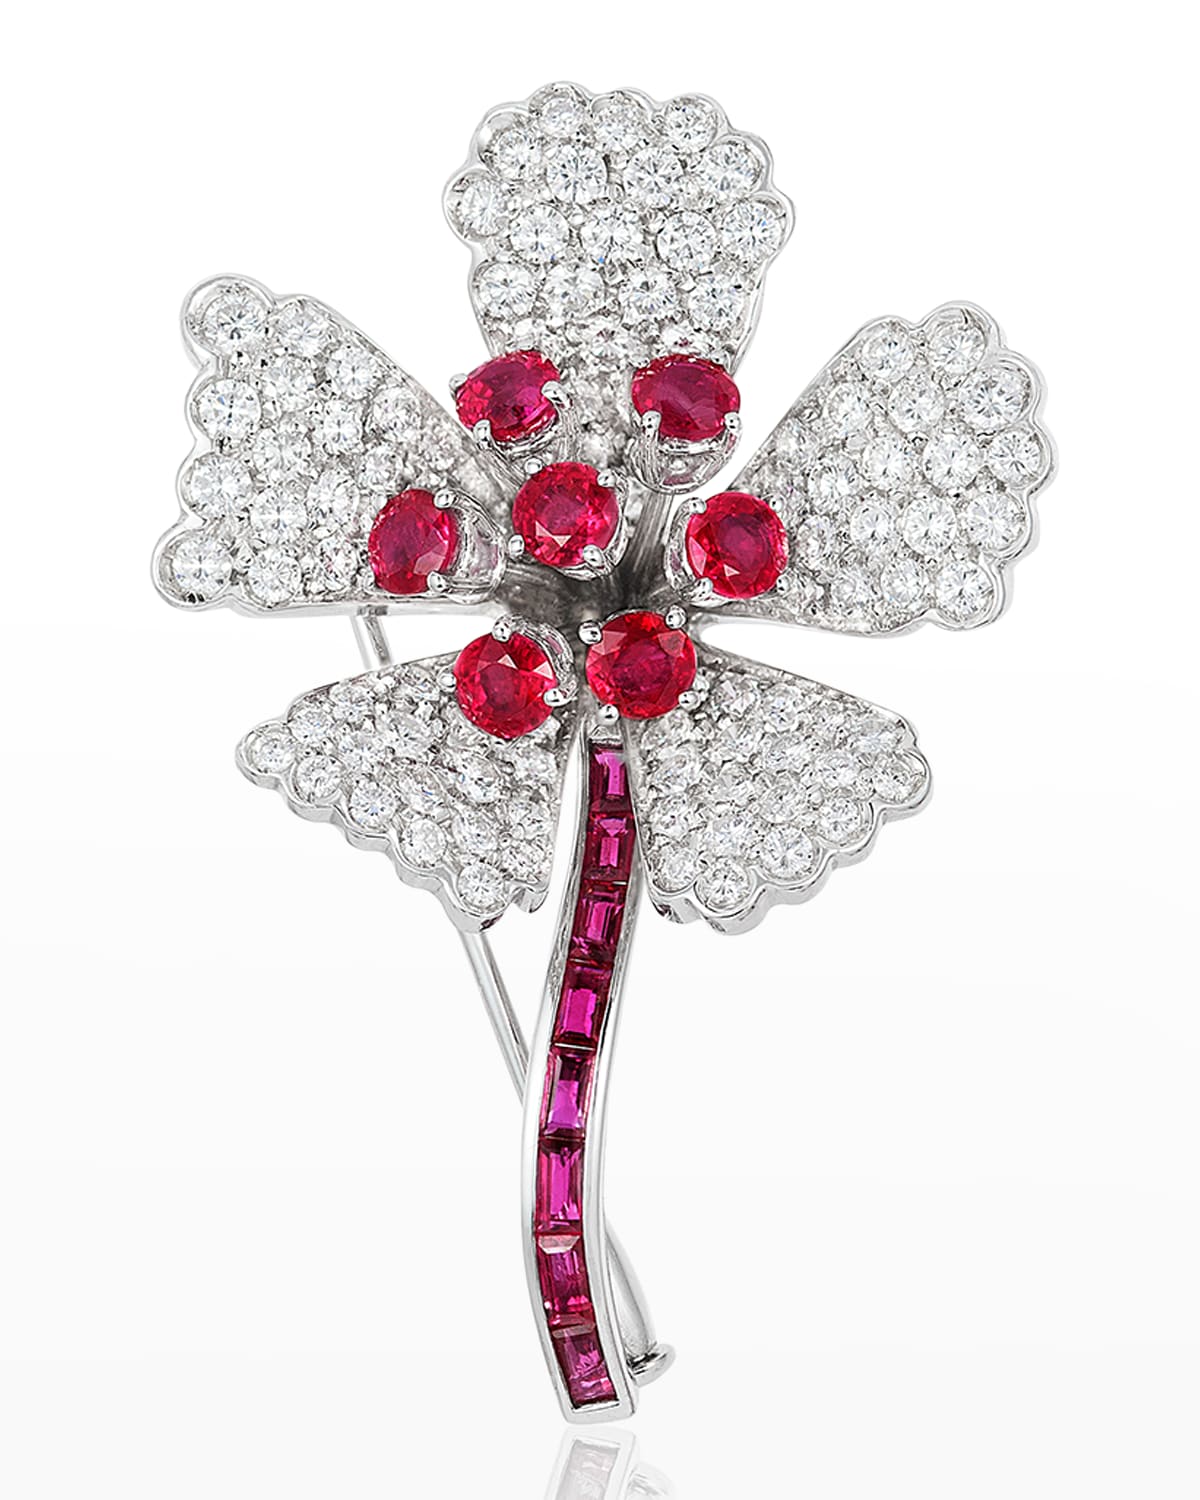 Andreoli White Gold Ruby and Diamond Flower Brooch